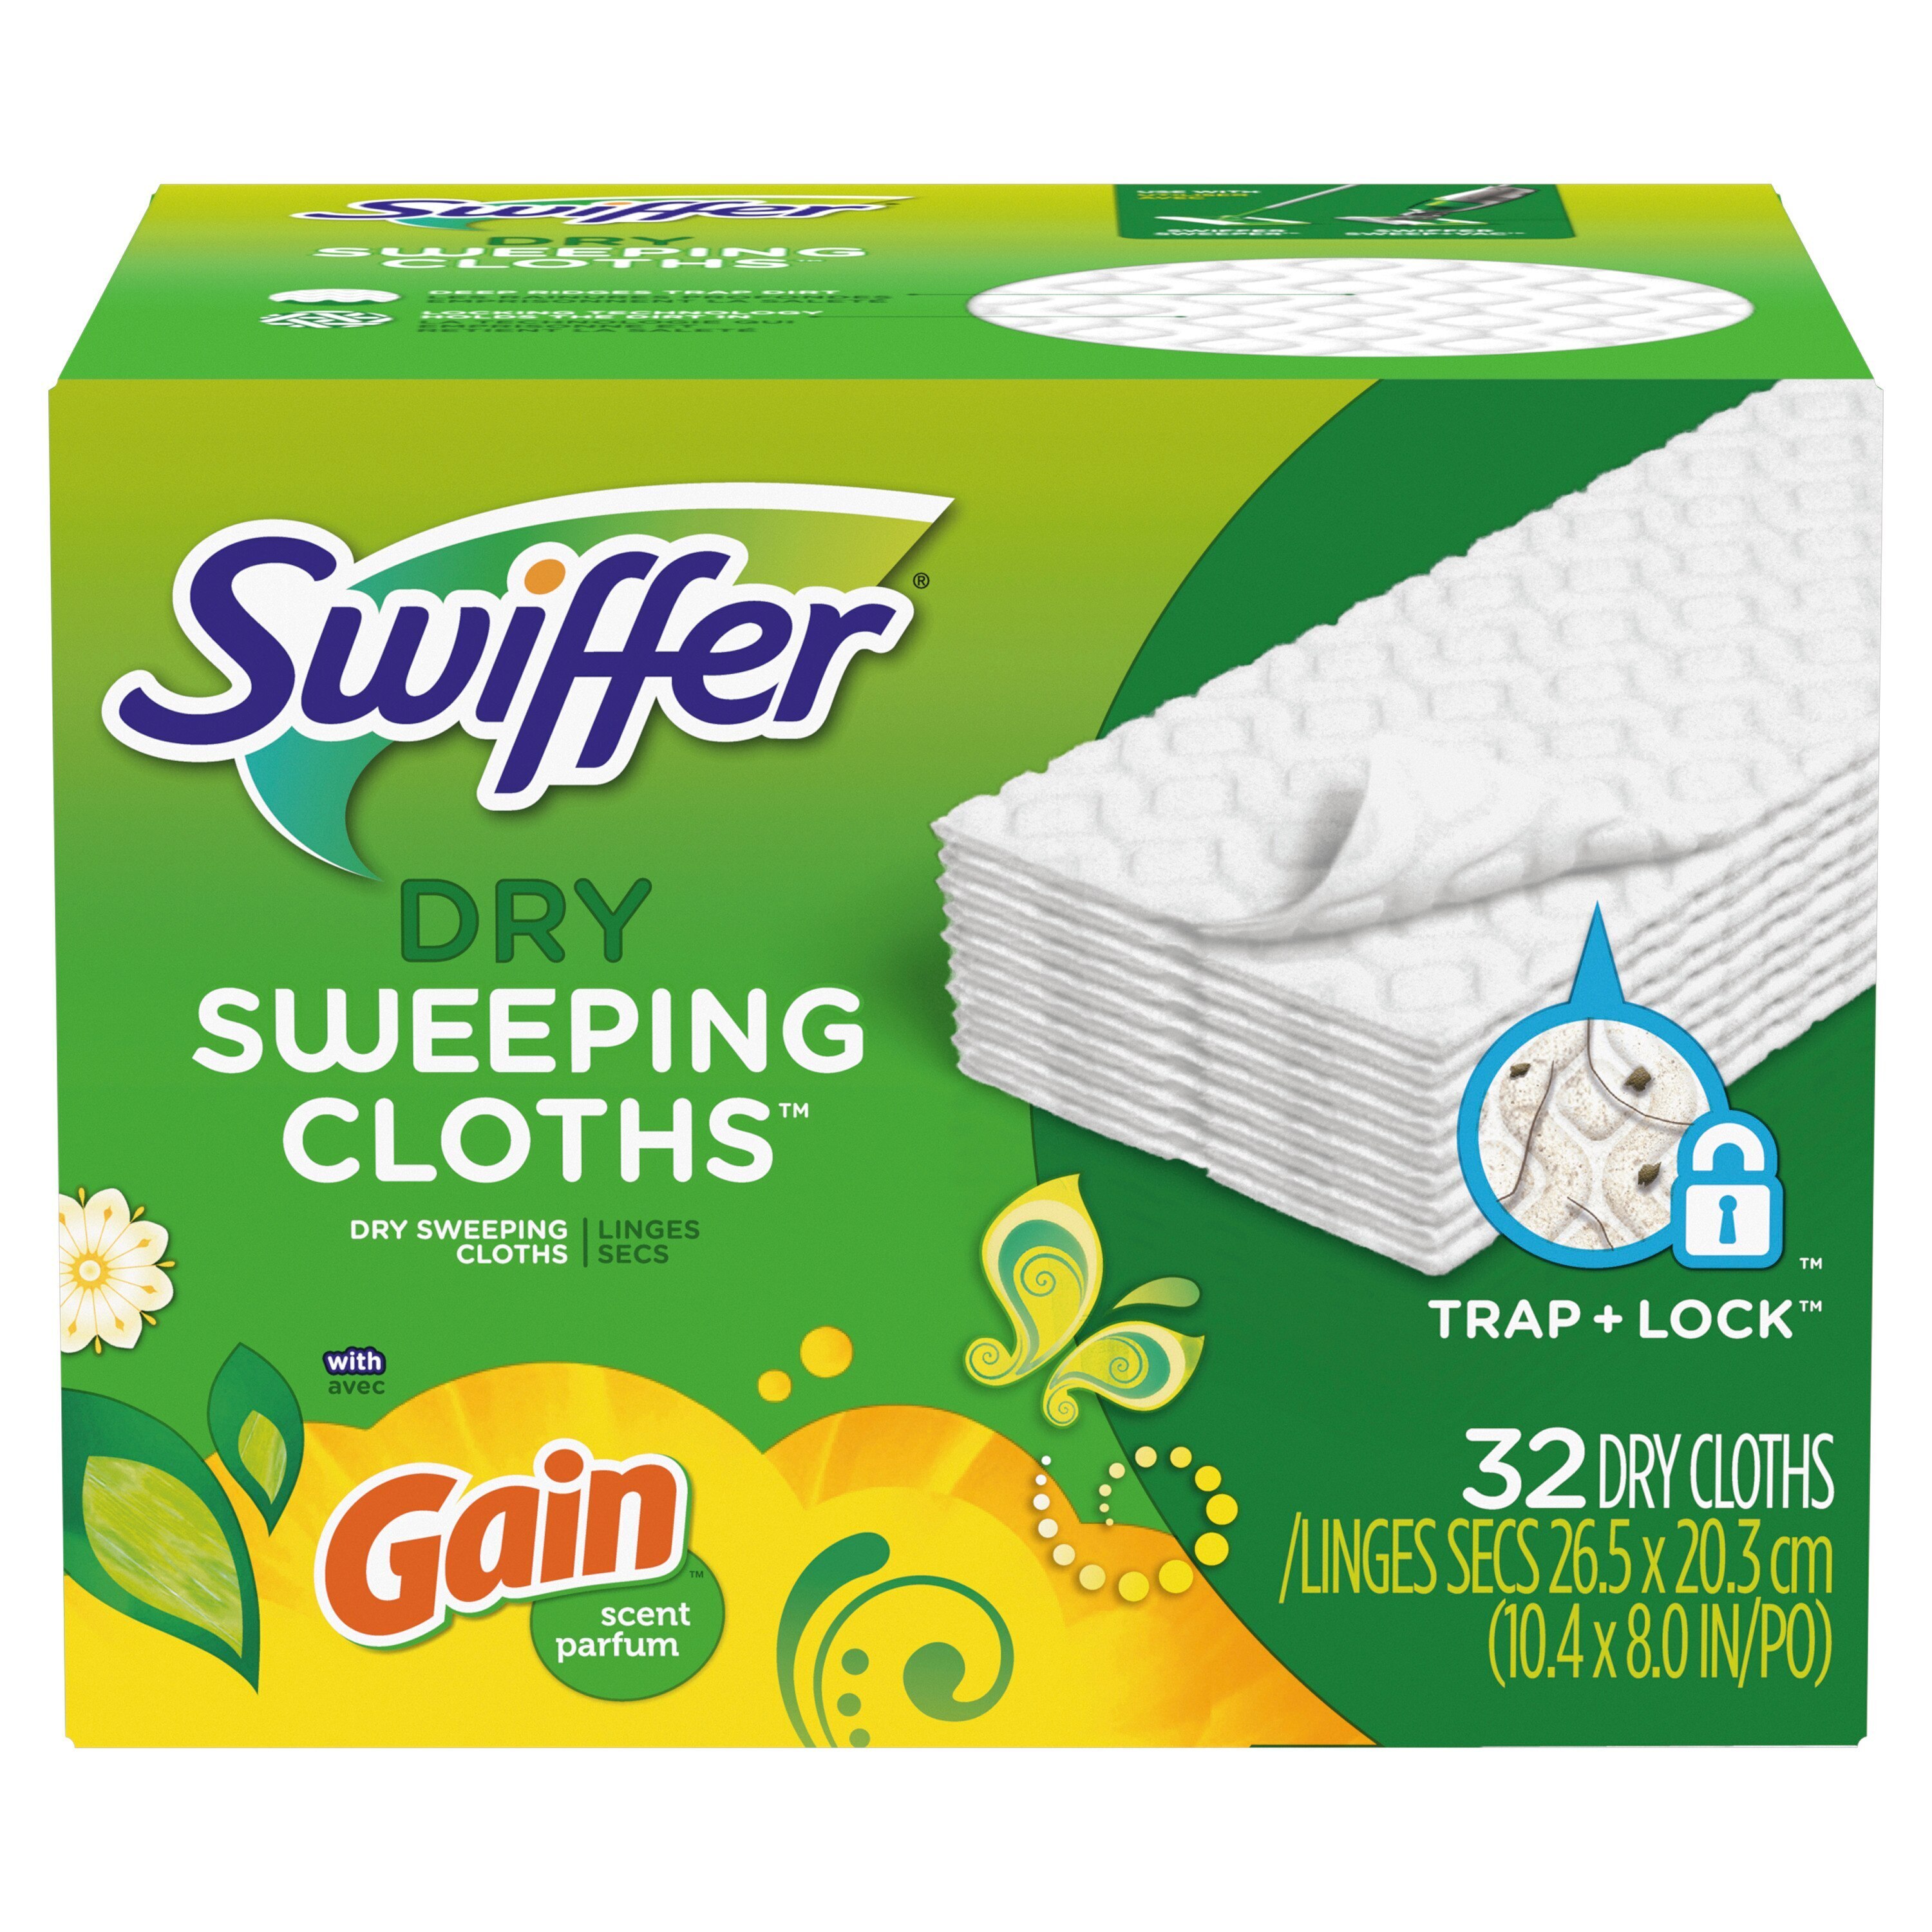 Swiffer Sweeper Dry Sweeping Cloth Refills with Gain Scent, 32 ct